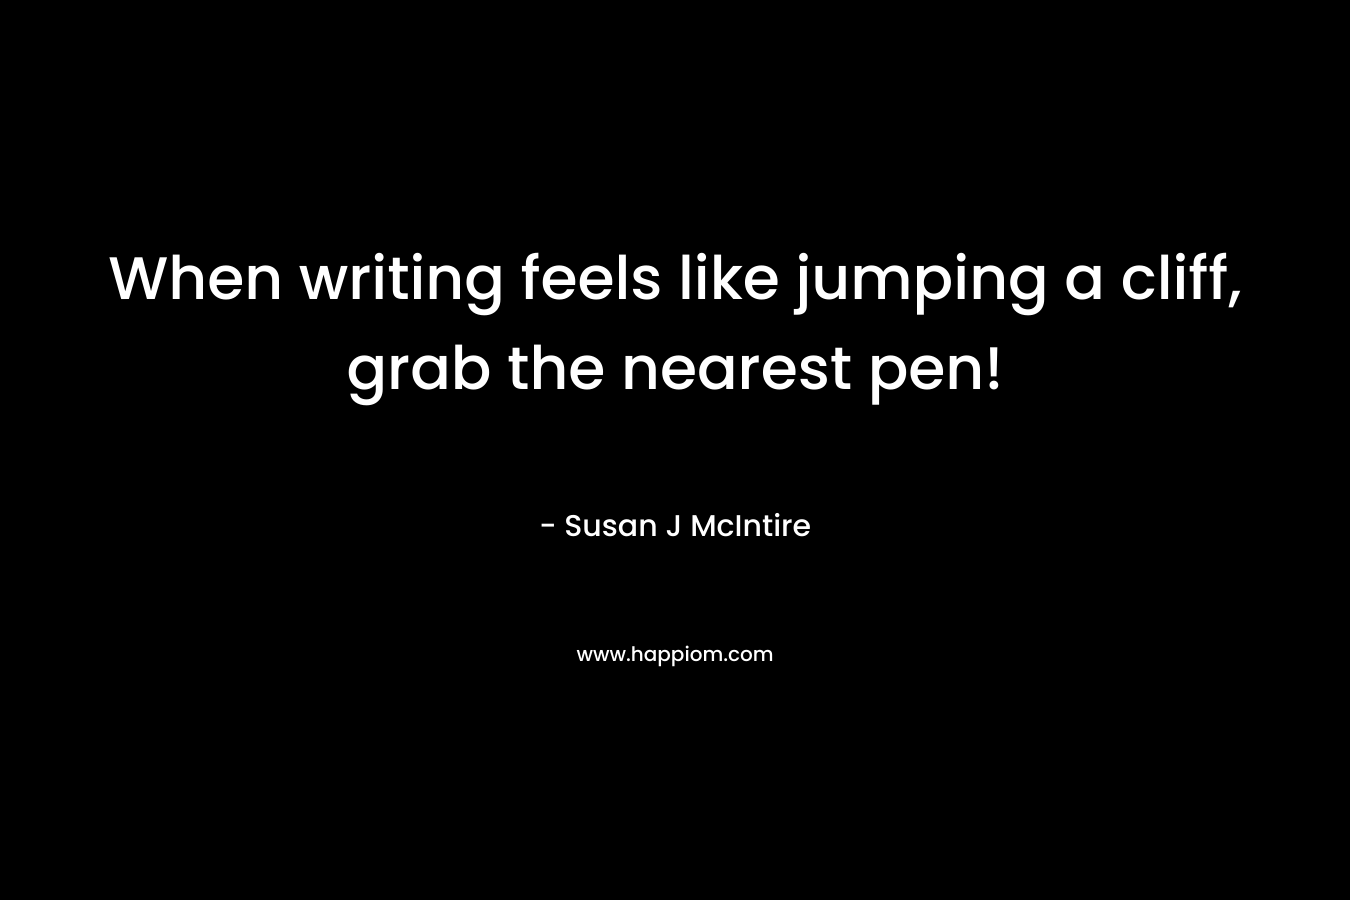 When writing feels like jumping a cliff, grab the nearest pen! – Susan J McIntire